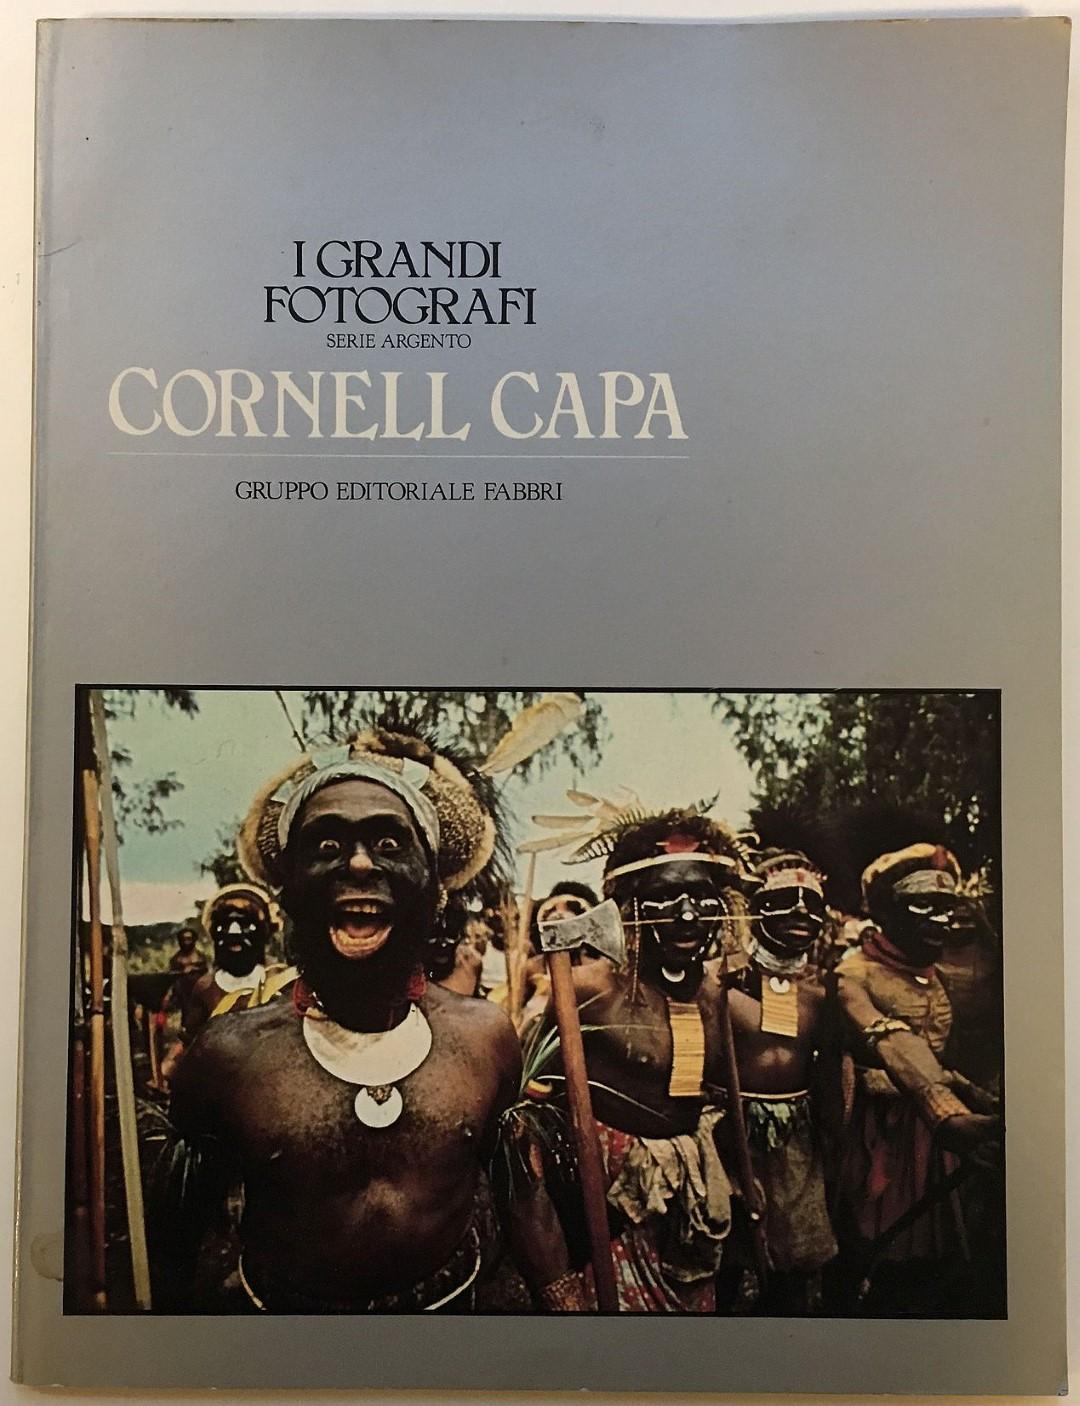 I Grandi Fotografi Serie Argento by CAPA, Cornell very good paperback (1983) Signed by Author